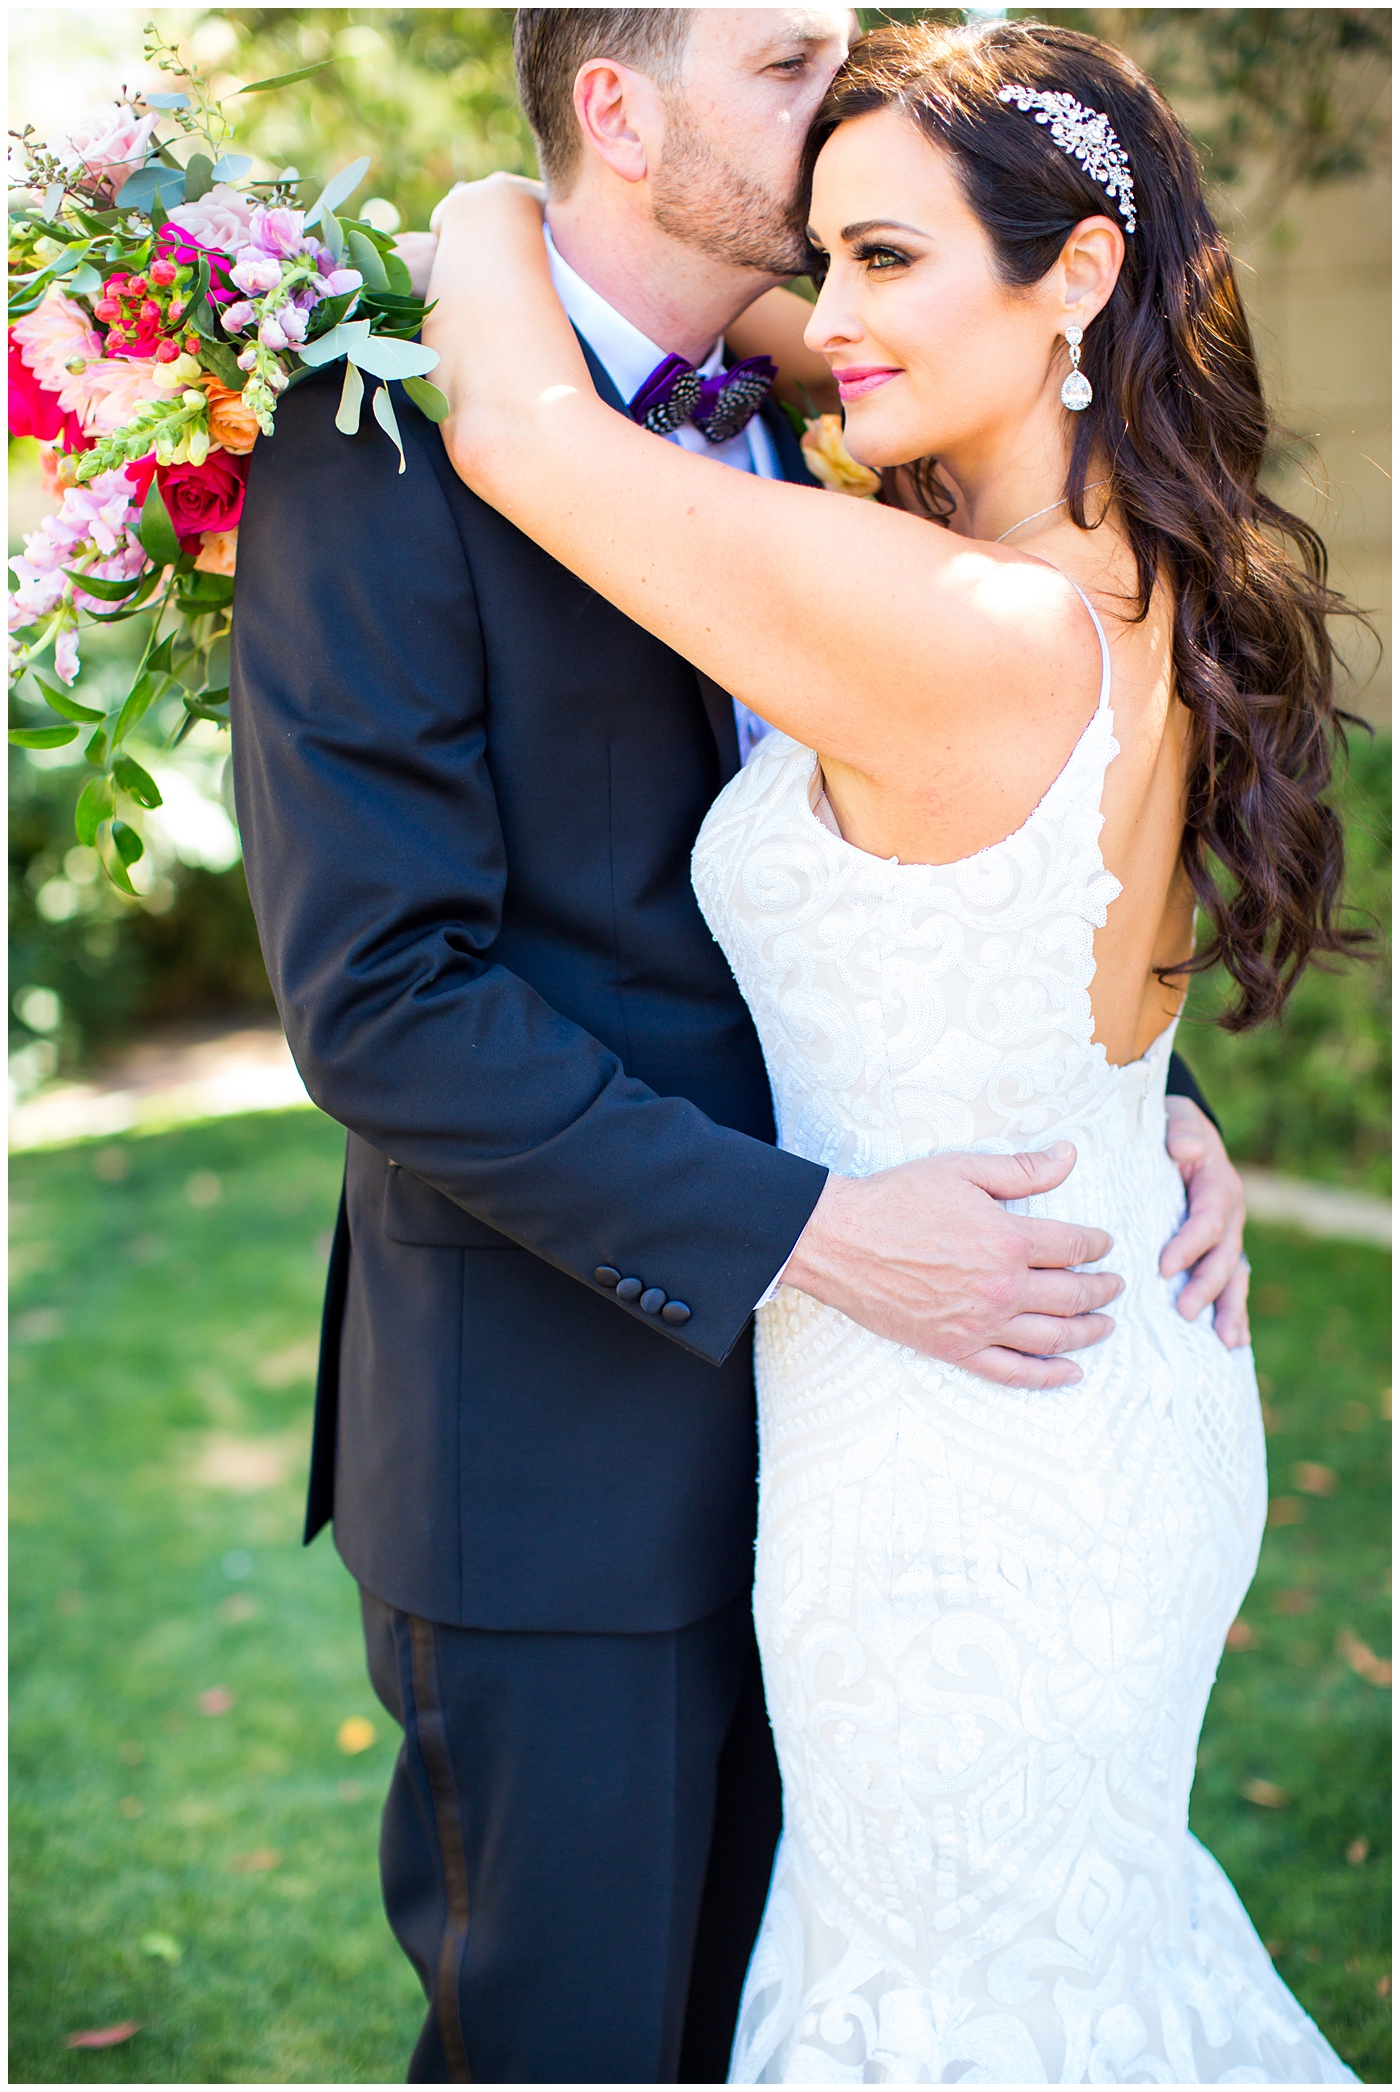 brunette bride in wedding dress with thin straps with bright color roses, dahlia, snap dragons loose bouquet with groom in black suit with purple bowtie with black and white feather with orange peony boutonniere wedding day portrait